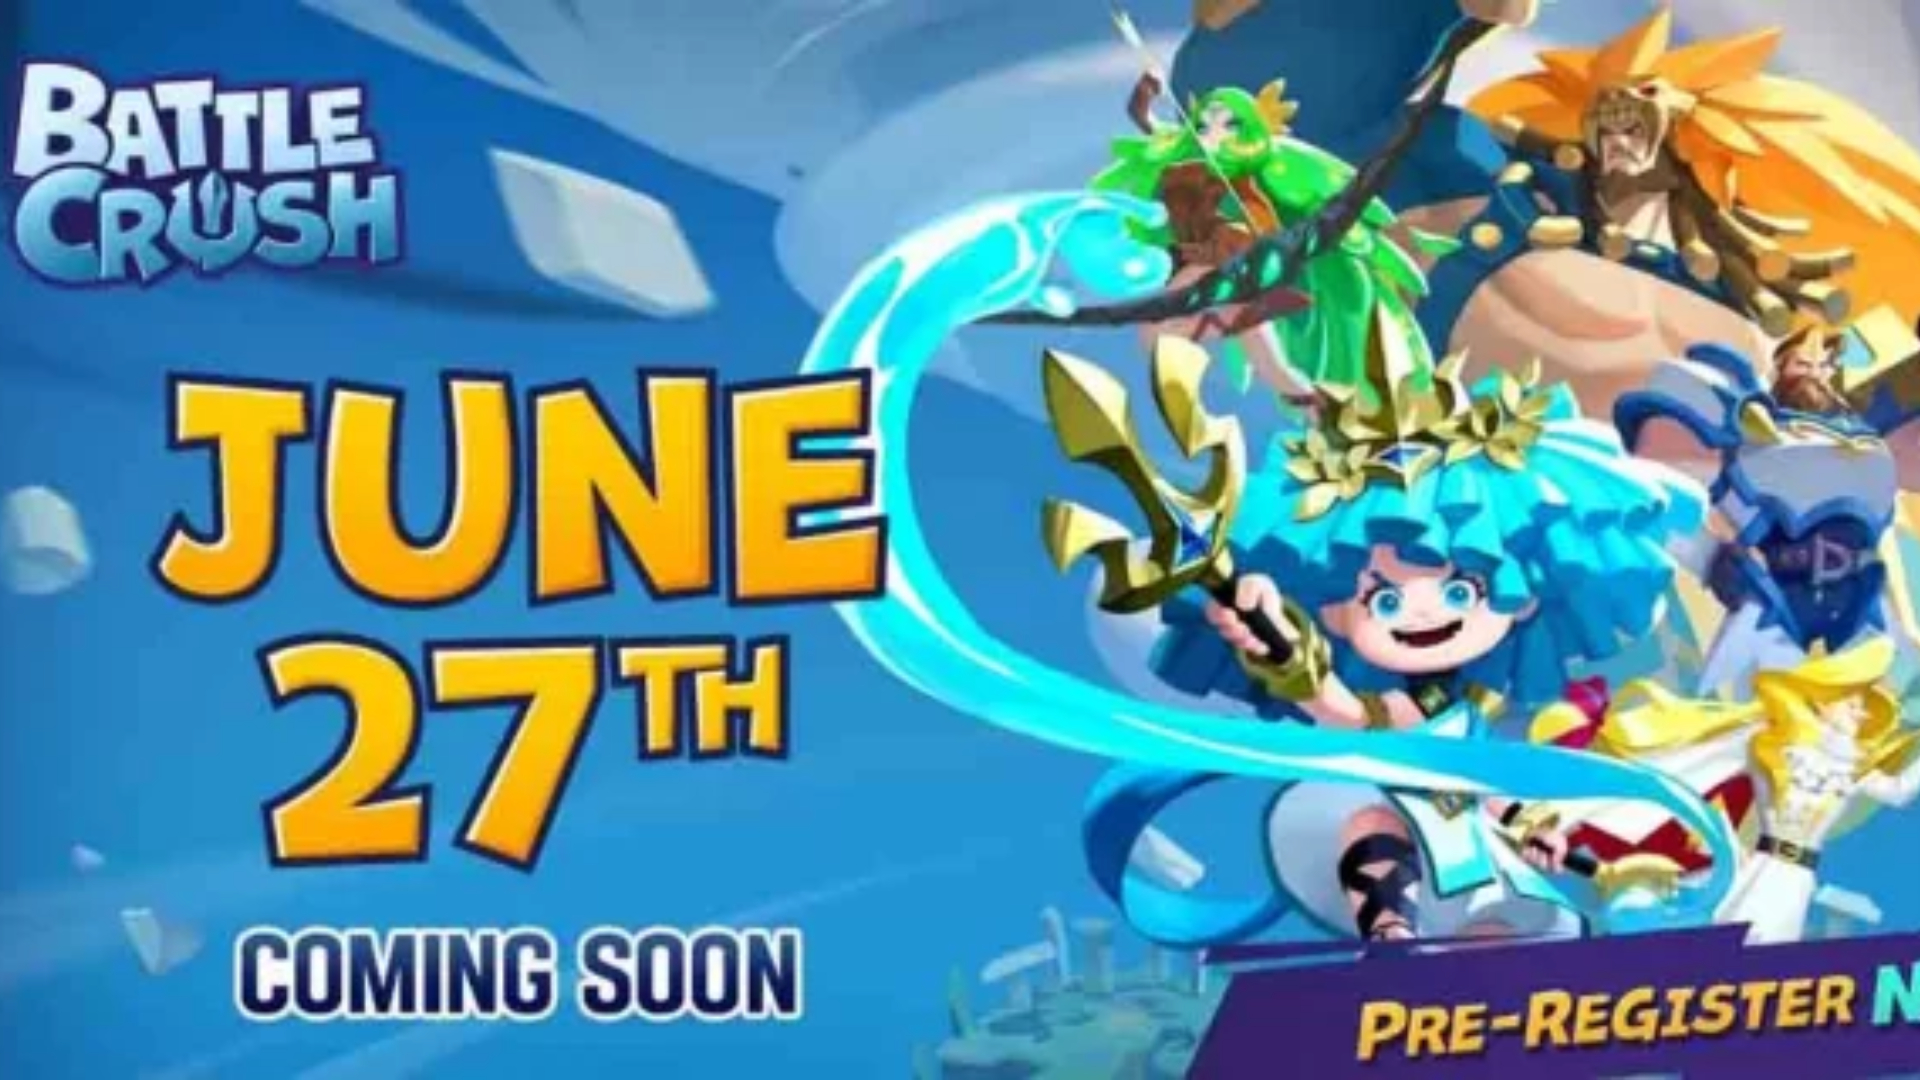 Battle Crush Opens Pre-Registrations and Plans for Android Launch on June 27th image